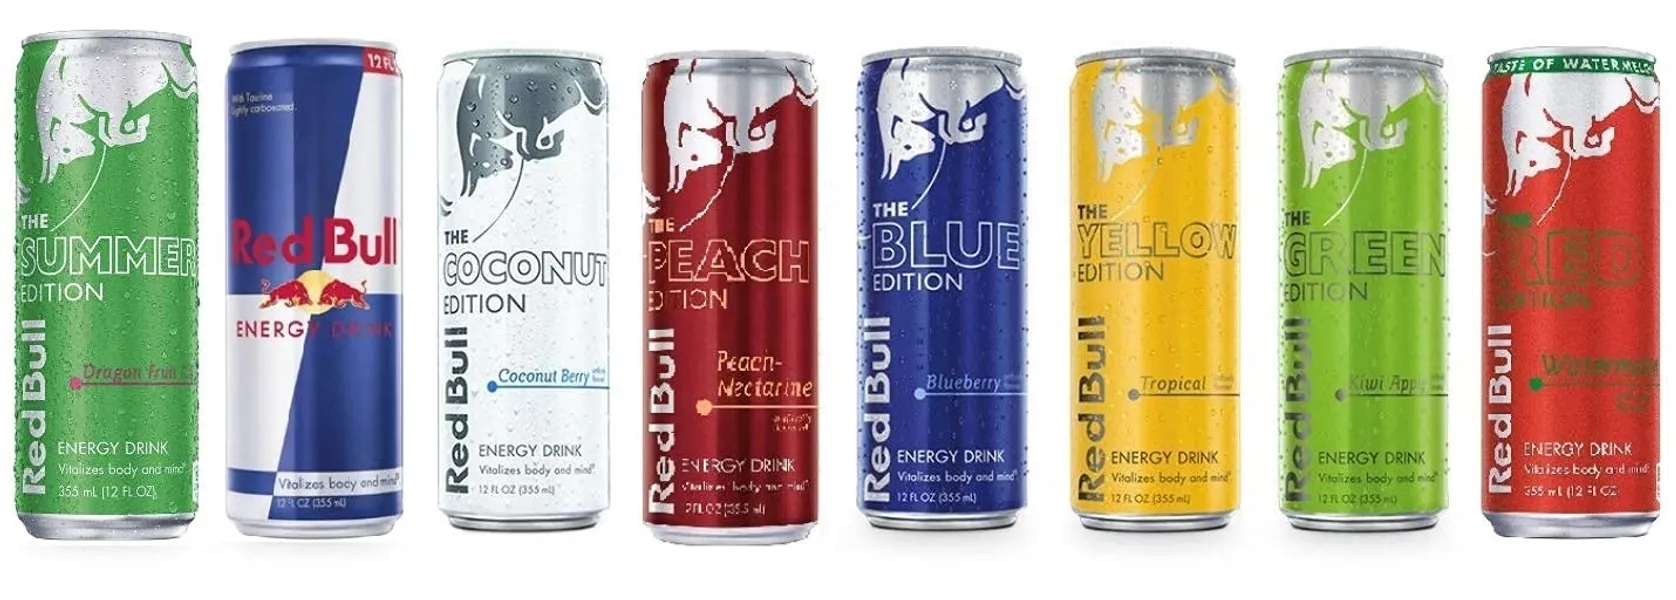 New Red Bull Editions Sampler Pack: Red, Yellow, Blue, Original, Peach, Dragon Fruit, Green, Coconut Berry 12fl.oz. (Pack of 8)